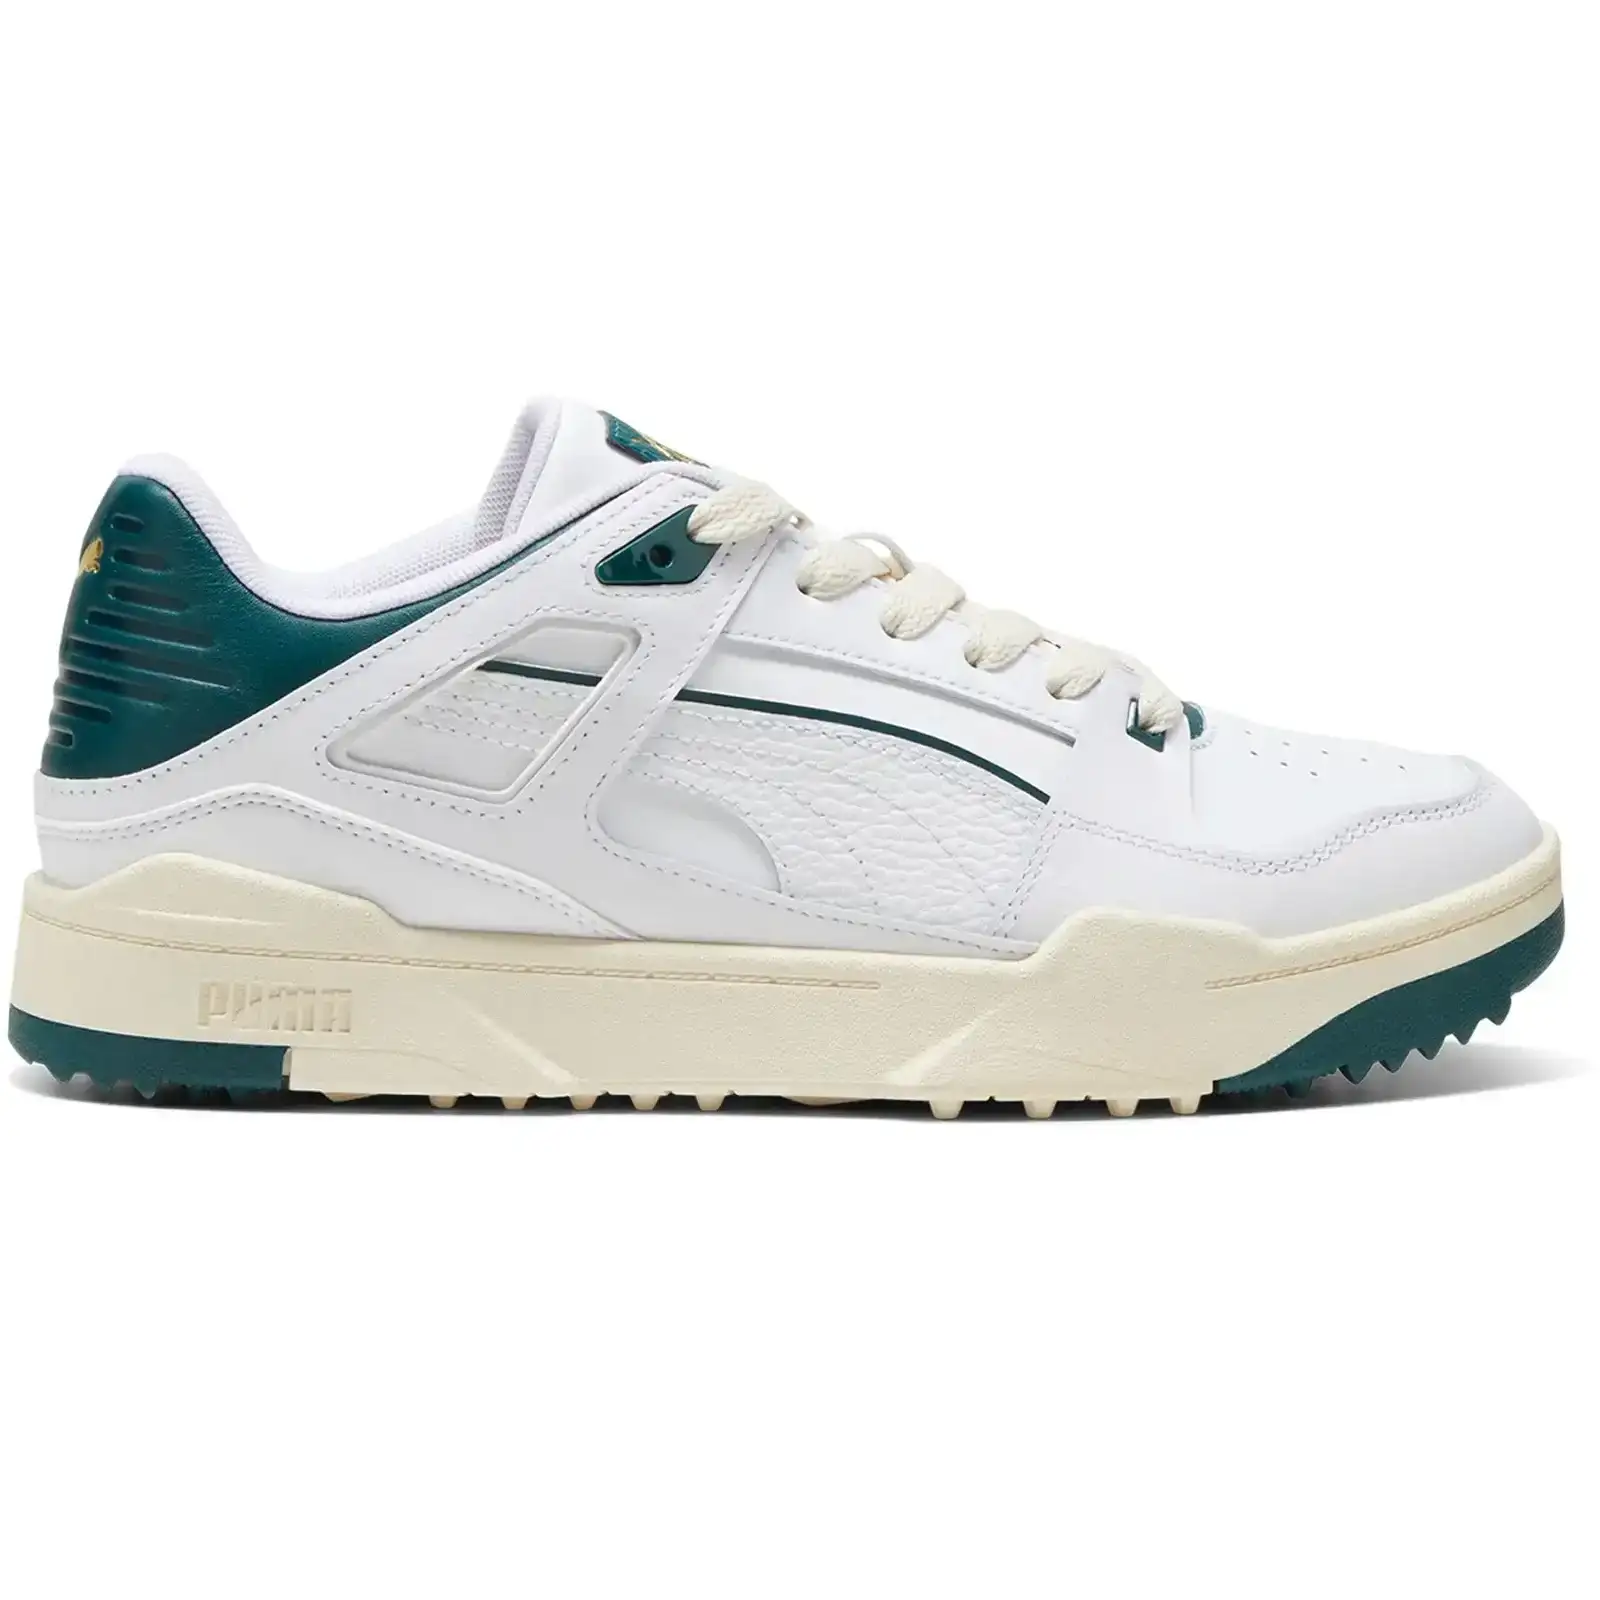 Image of Slipstream Leather Spikeless Waterproof Golf Shoes White/Green - SS24